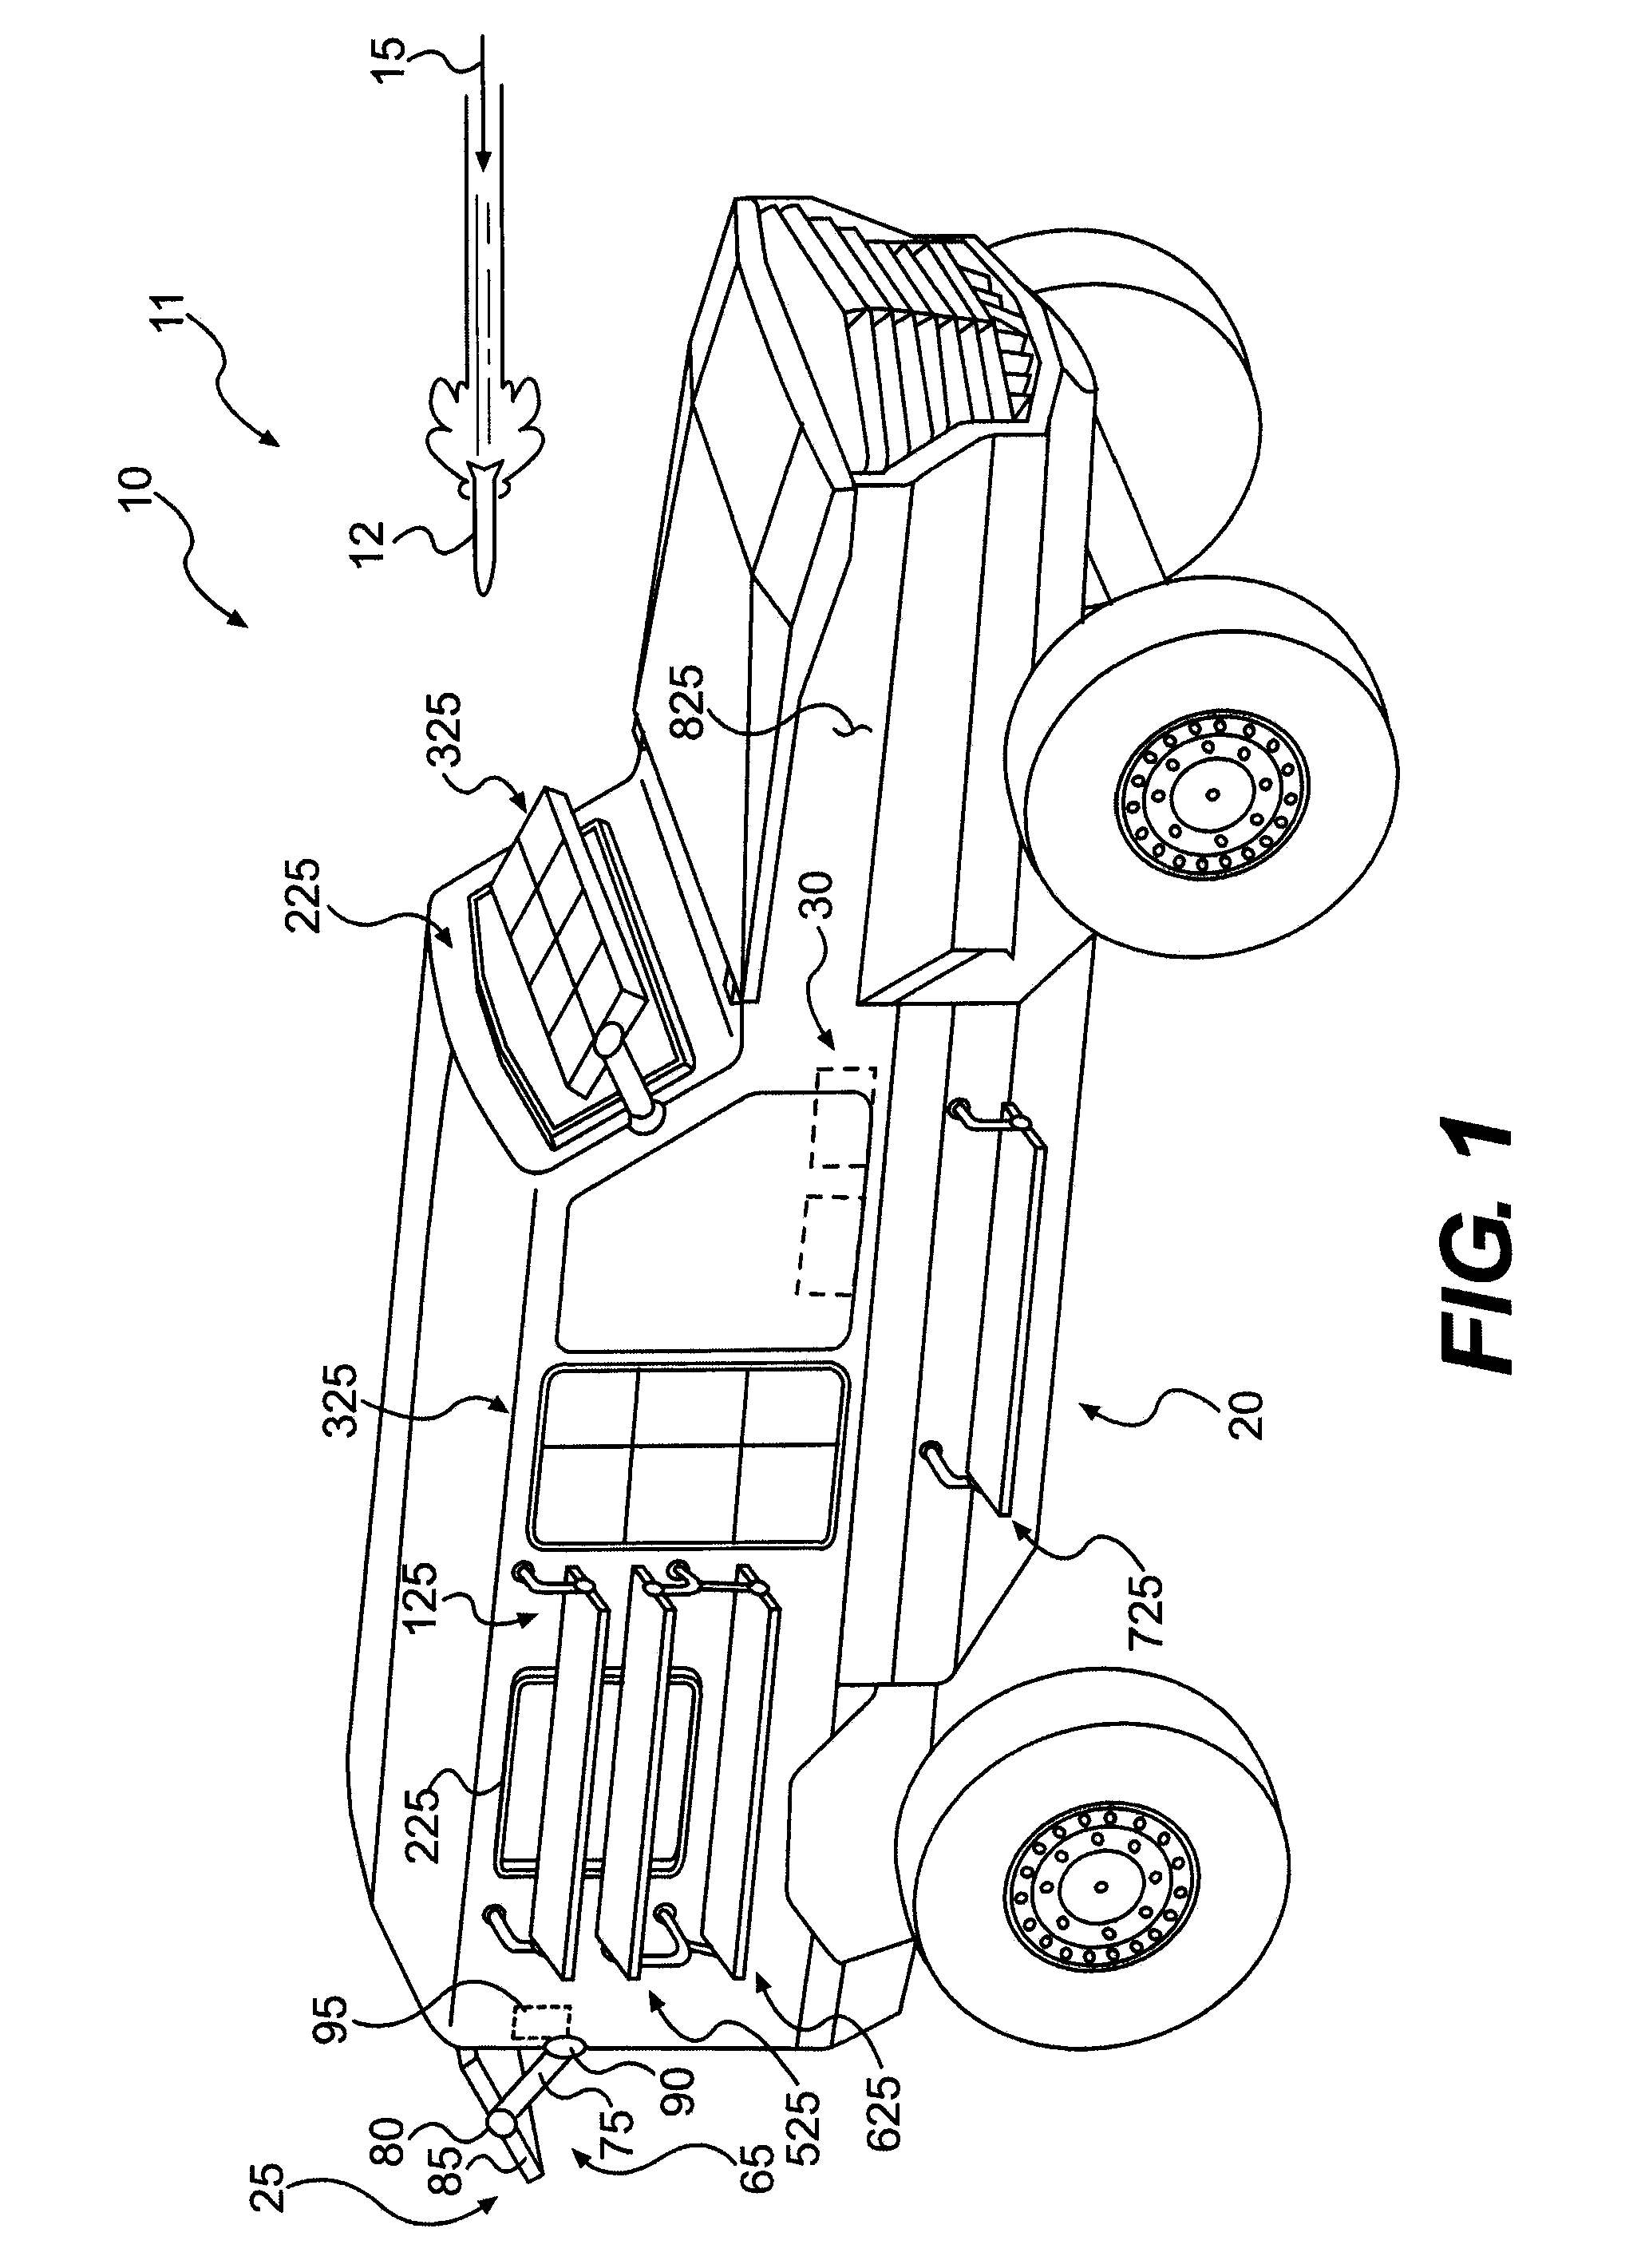 Apparatus for Defeating Threat Projectiles